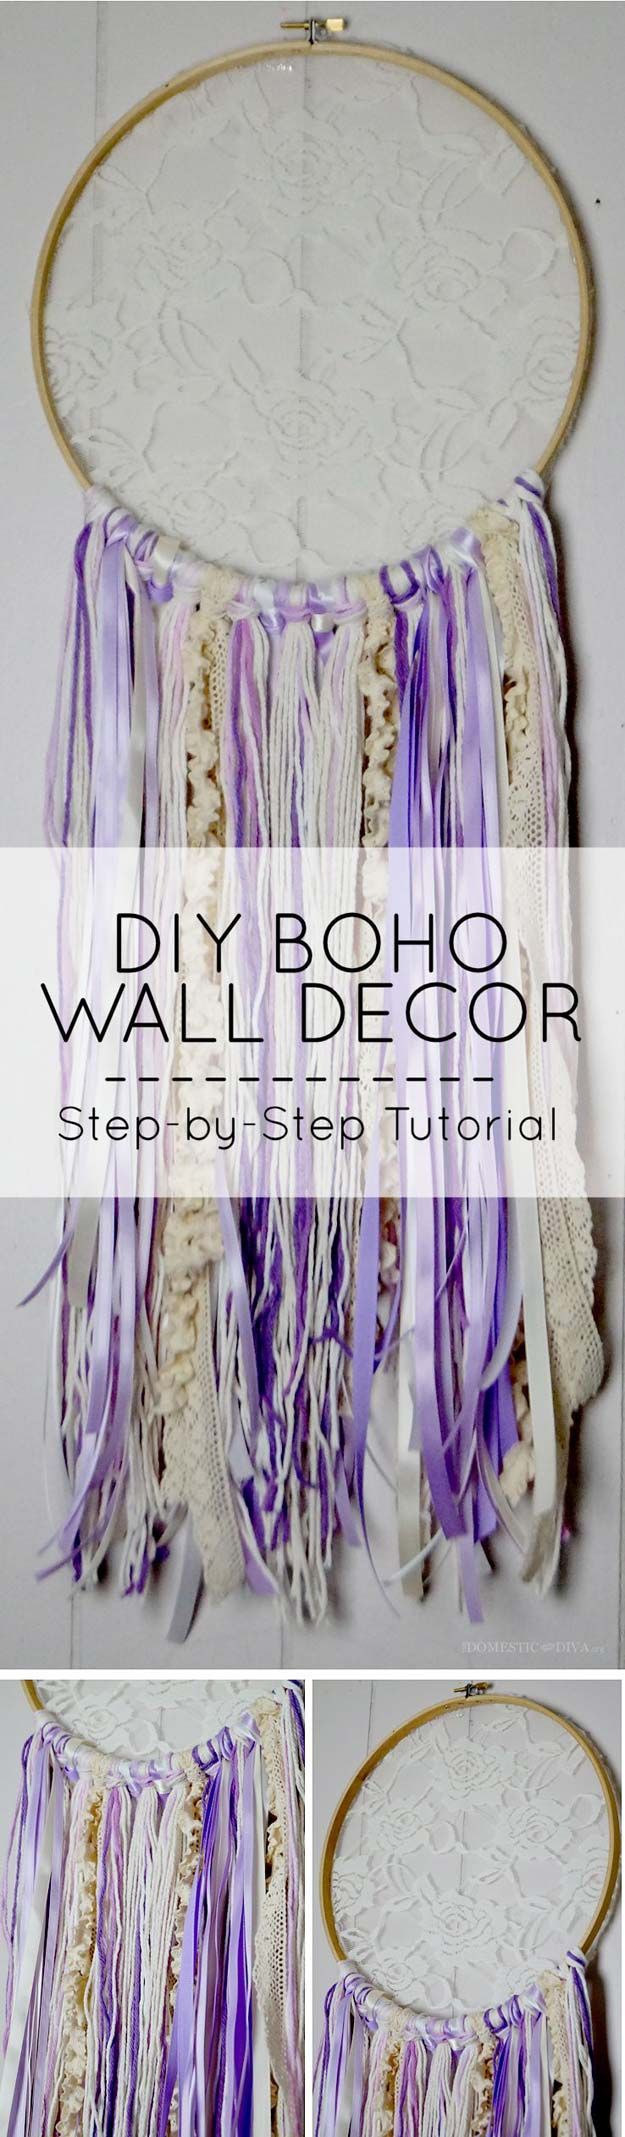 DIY Purple Room Decor – DIY Boho Wall Decor – Best Bedroom Ideas and Projects in Purple – Cool Accessories, Crafts, Wall Art,